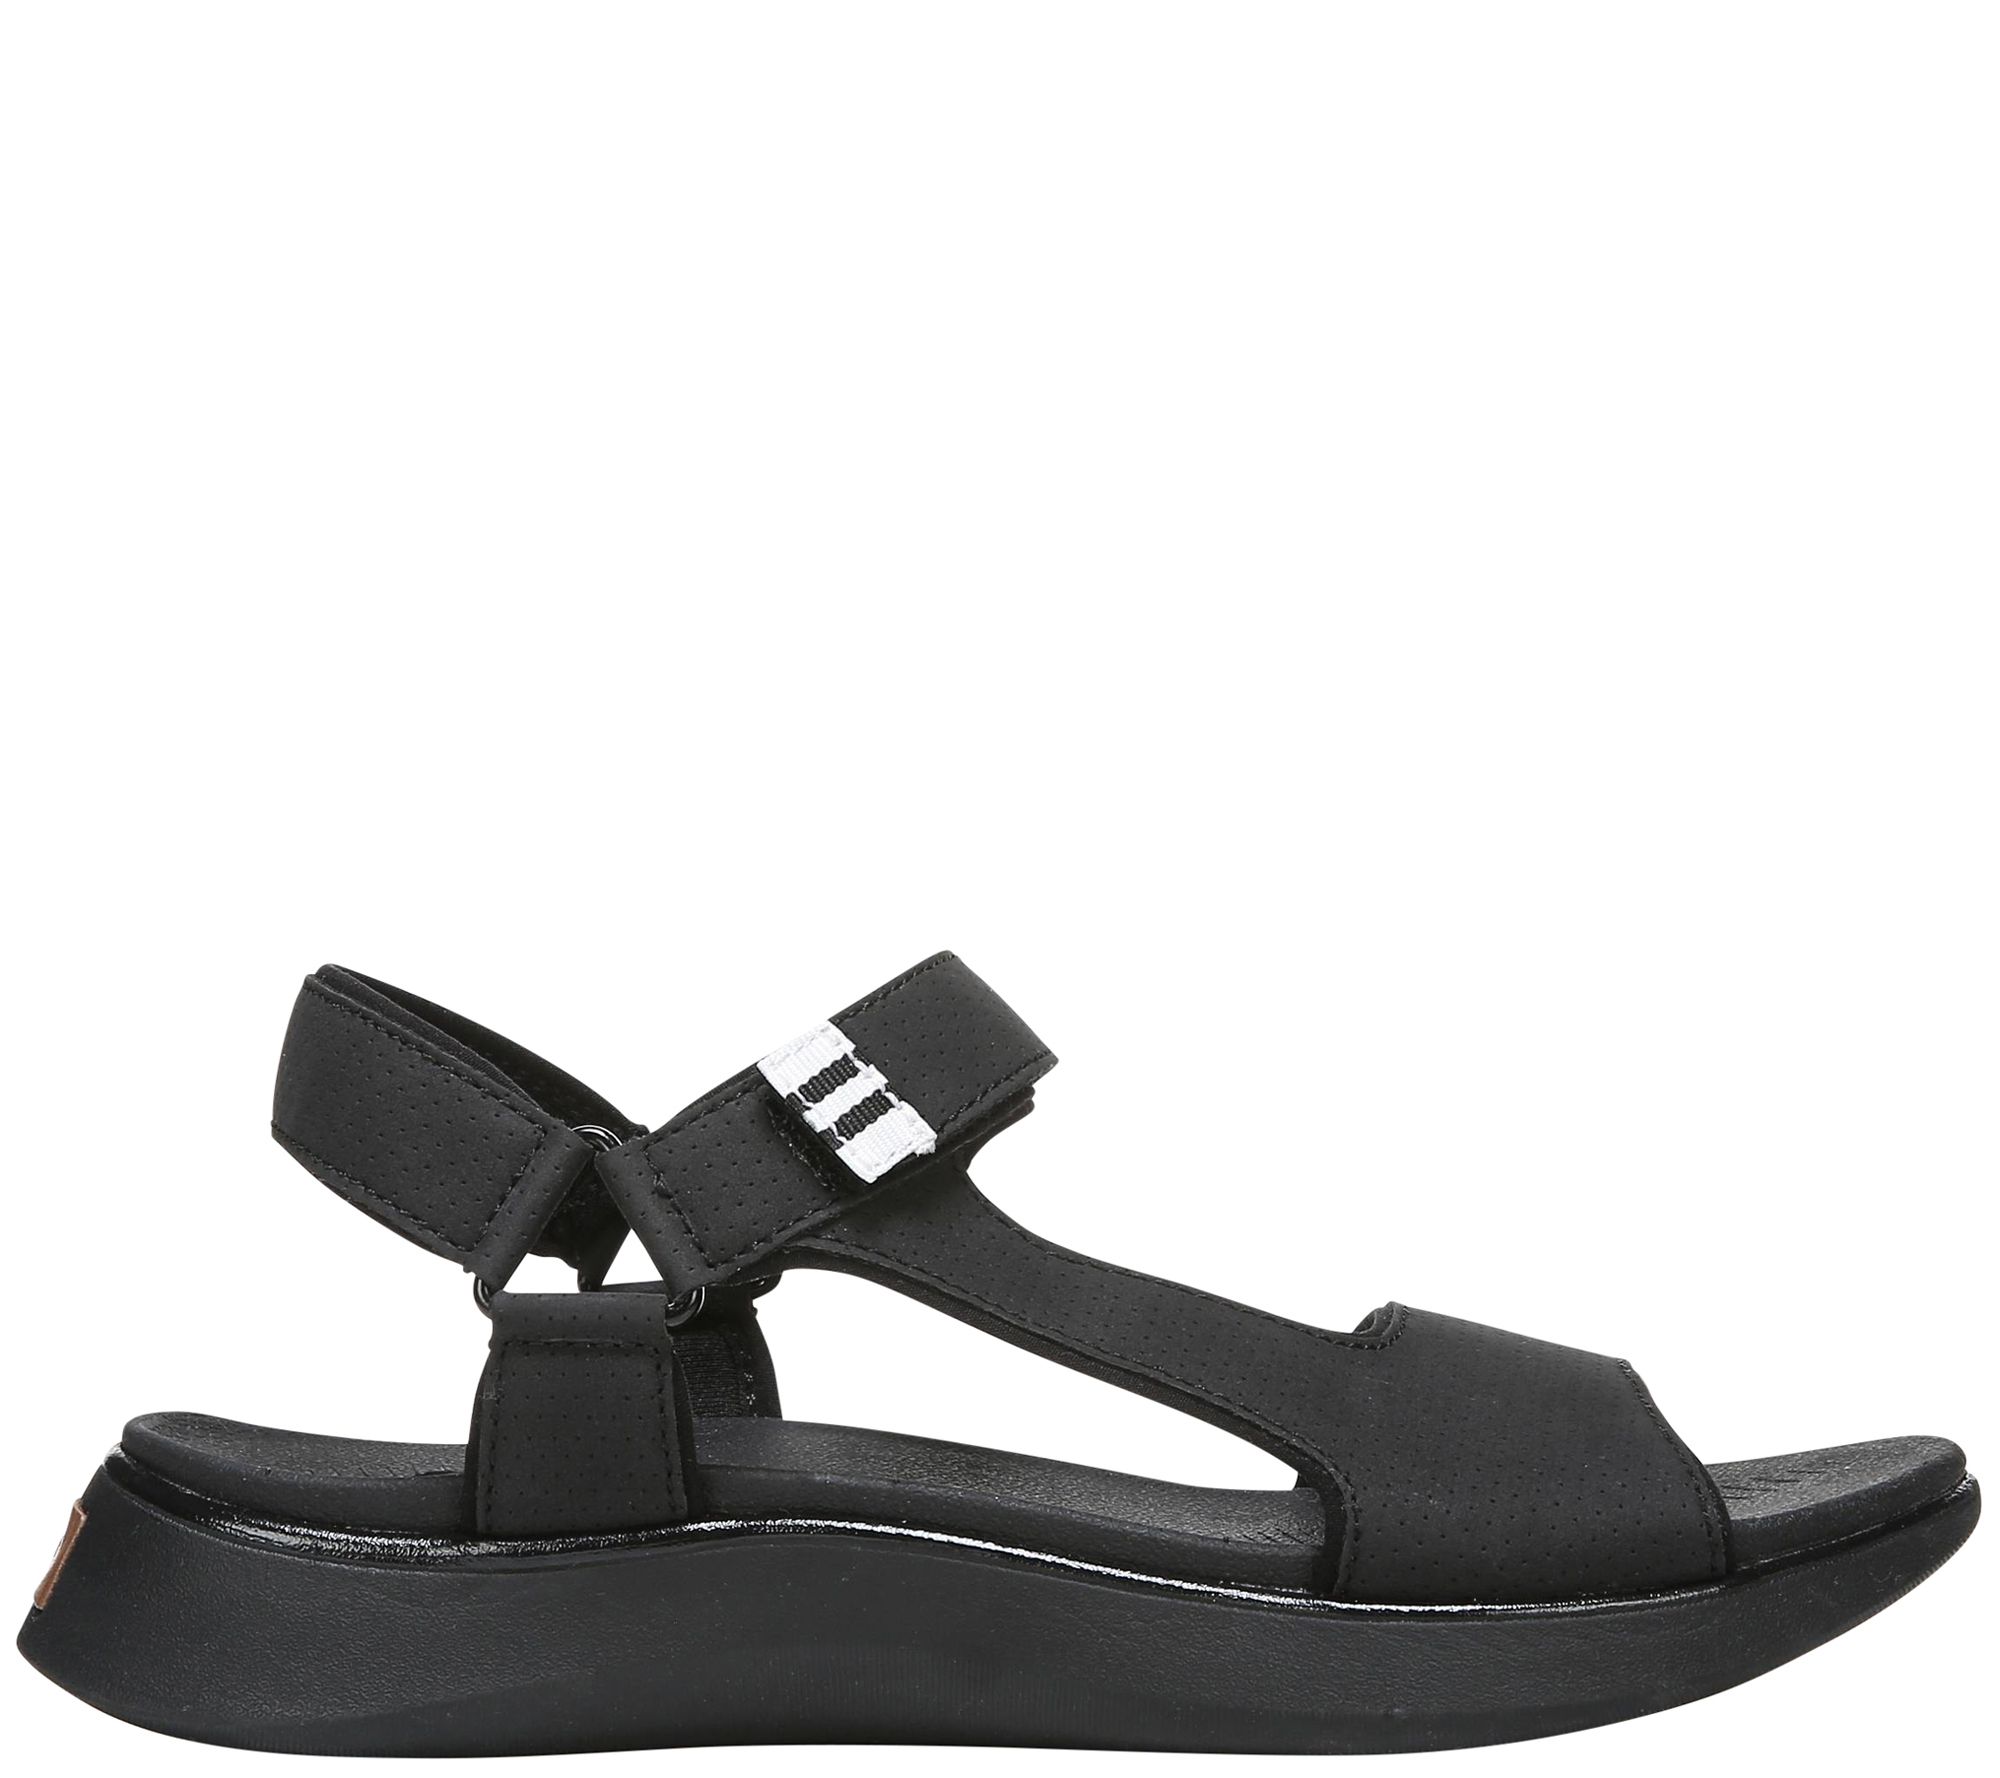 Dr. Scholl's Adjustable Strappy Sandals - Freeflow - QVC.com